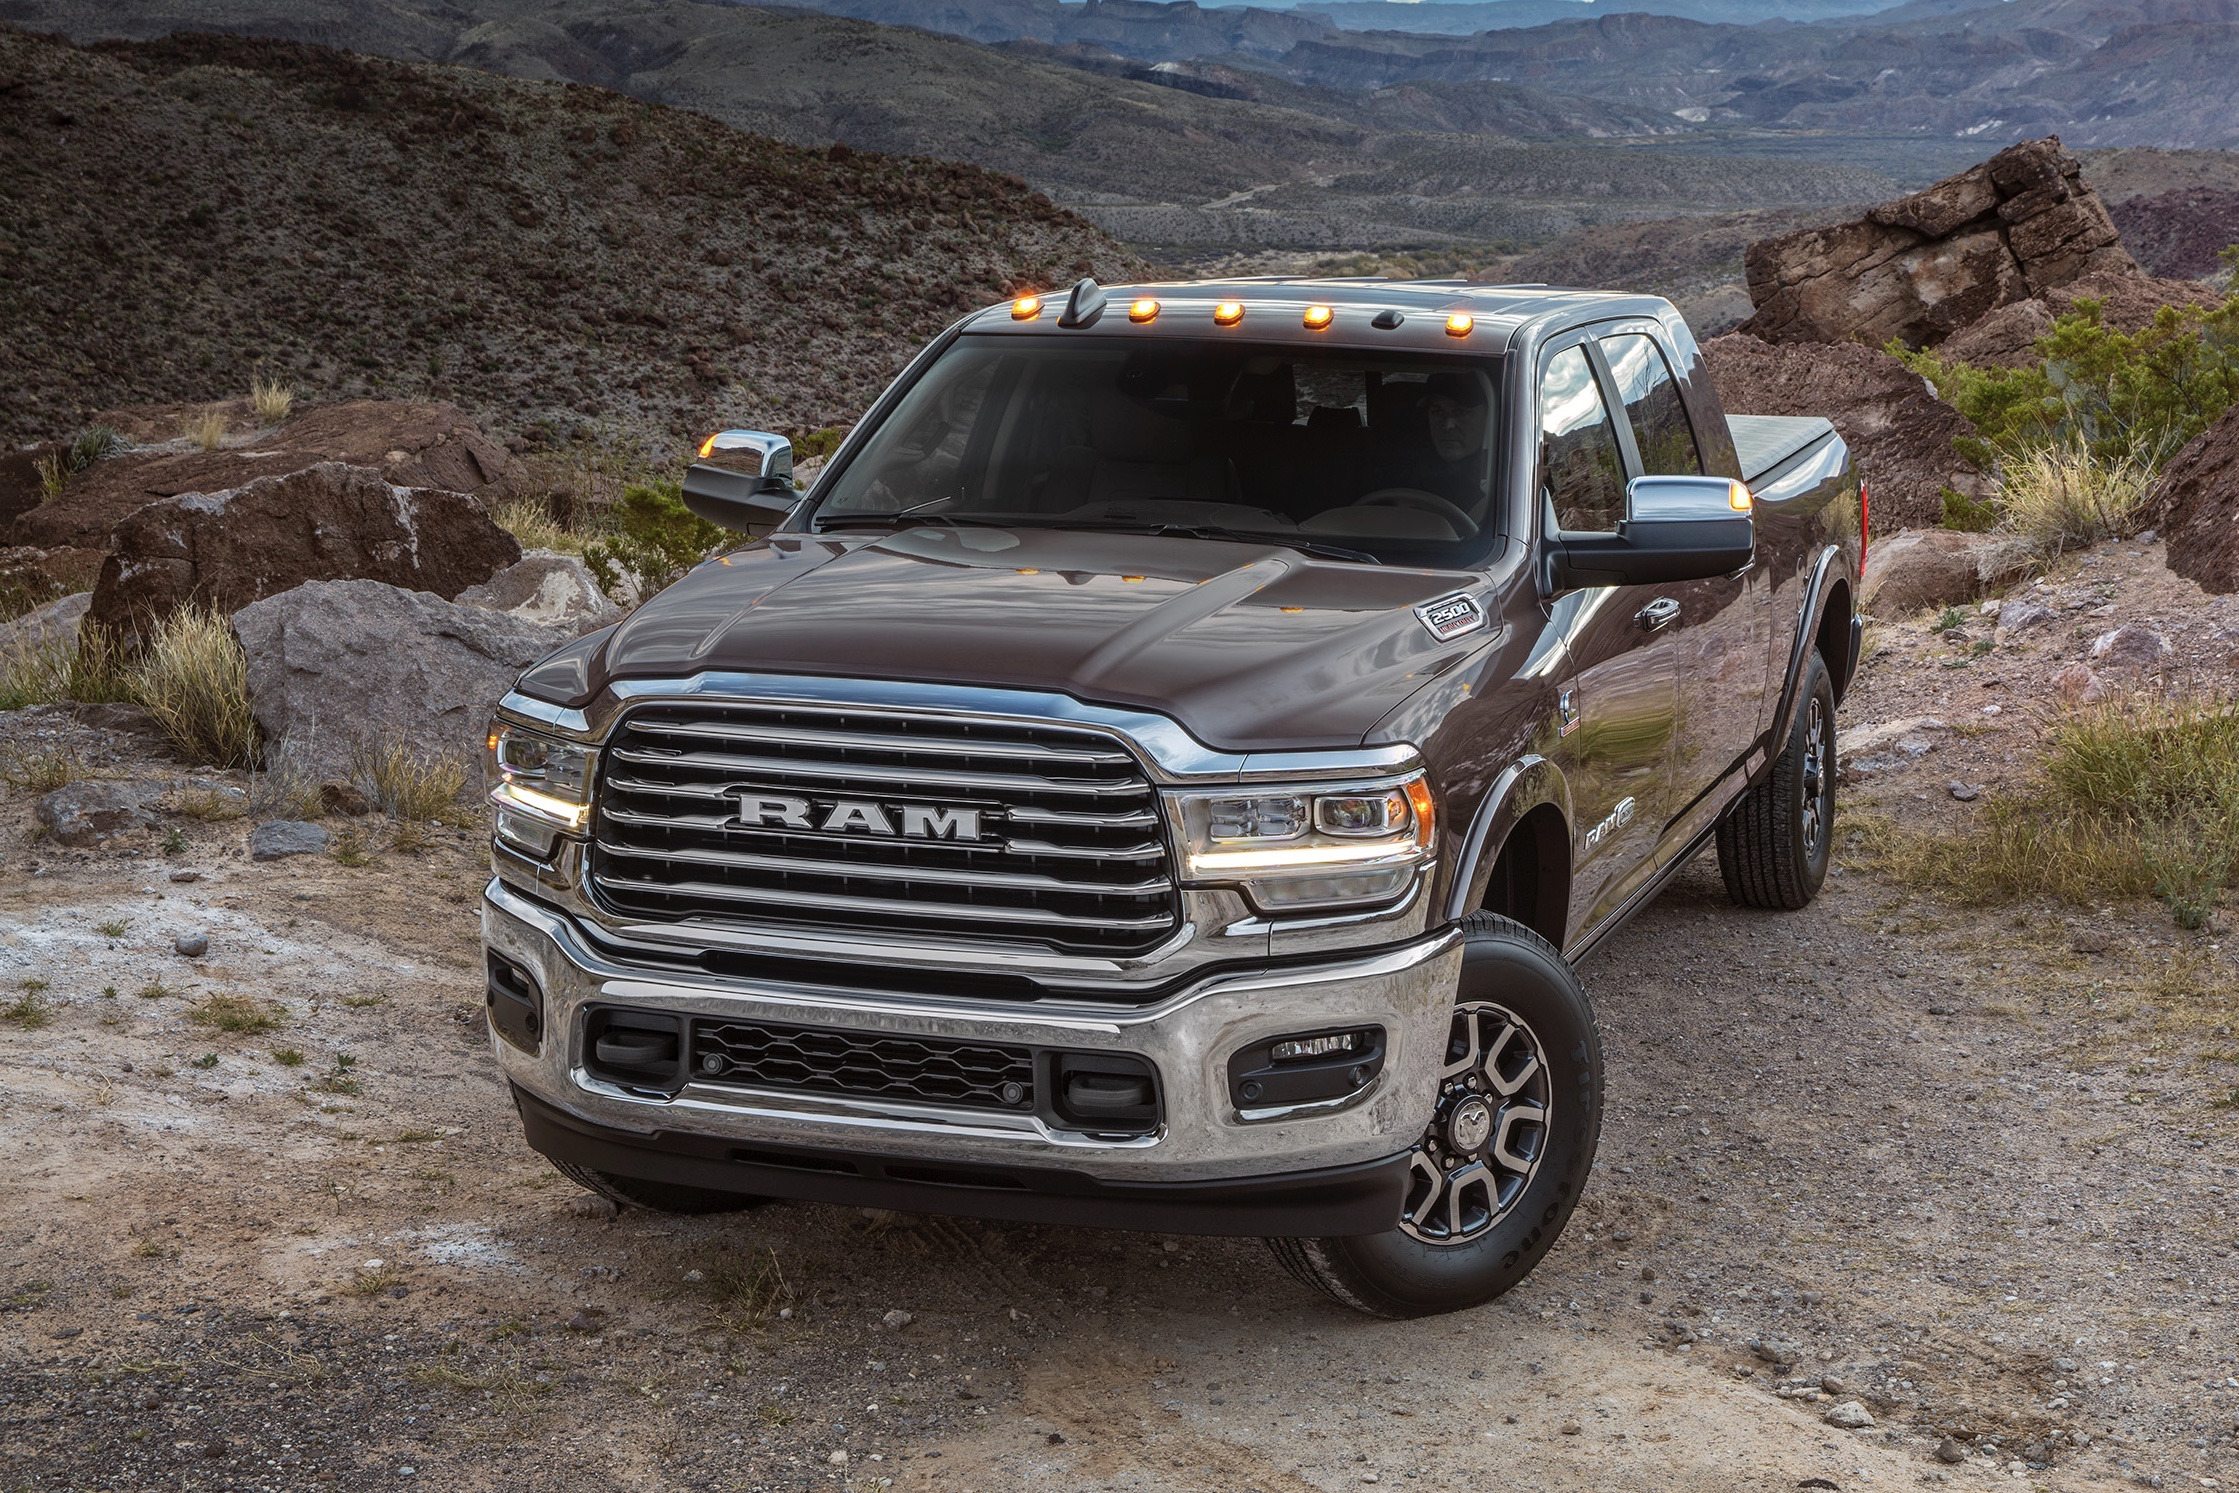 2019 Ram 2500 And 3500 Laramie Longhorn Edition Features